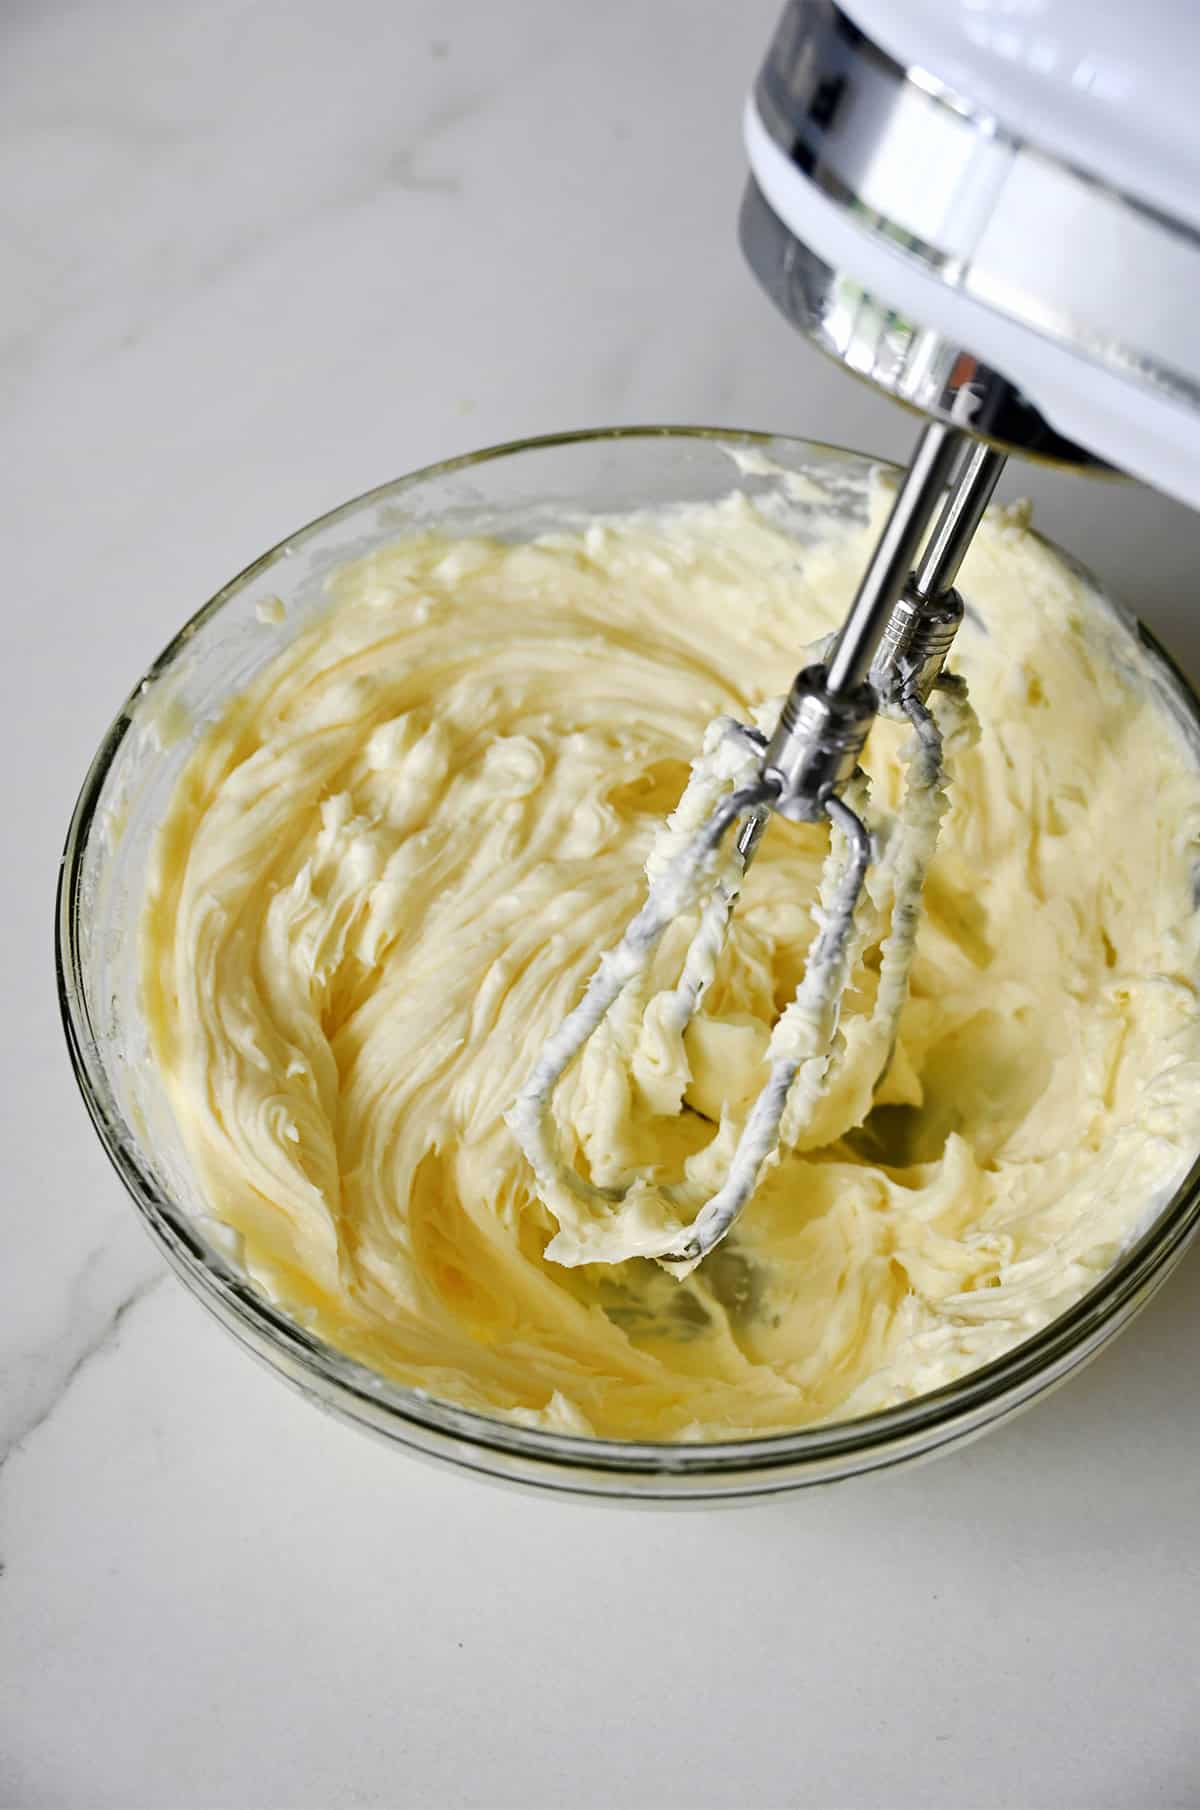 Cheesecake filling in a glass bowl with a hand mixer hovering over the top.